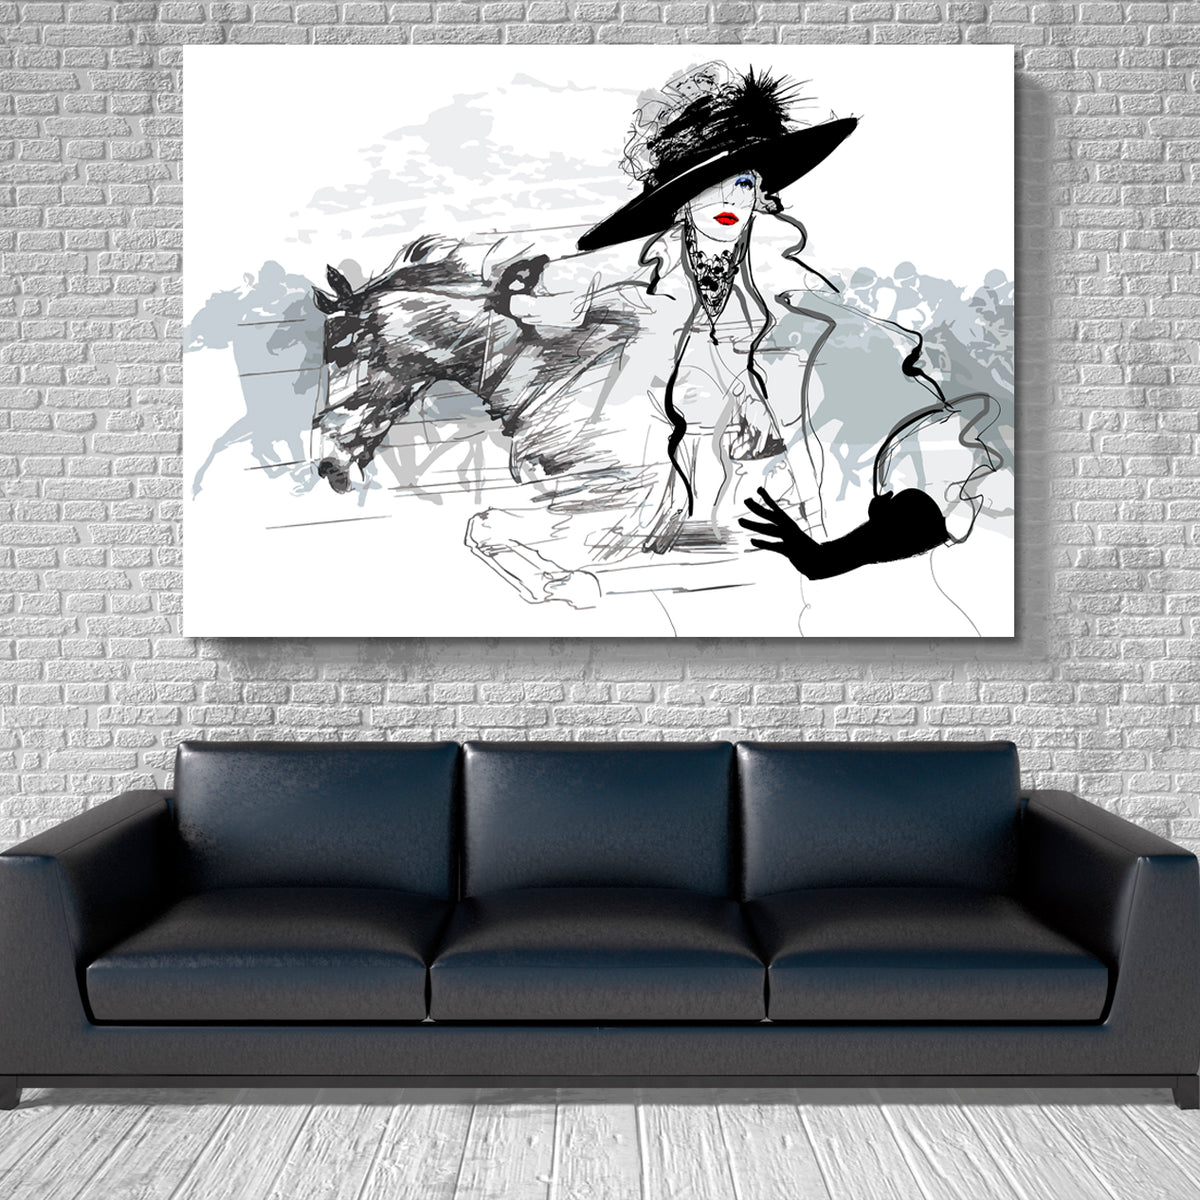 Woman on a Horse Race Black and White Wall Art Print Artesty 1 panel 24" x 16" 